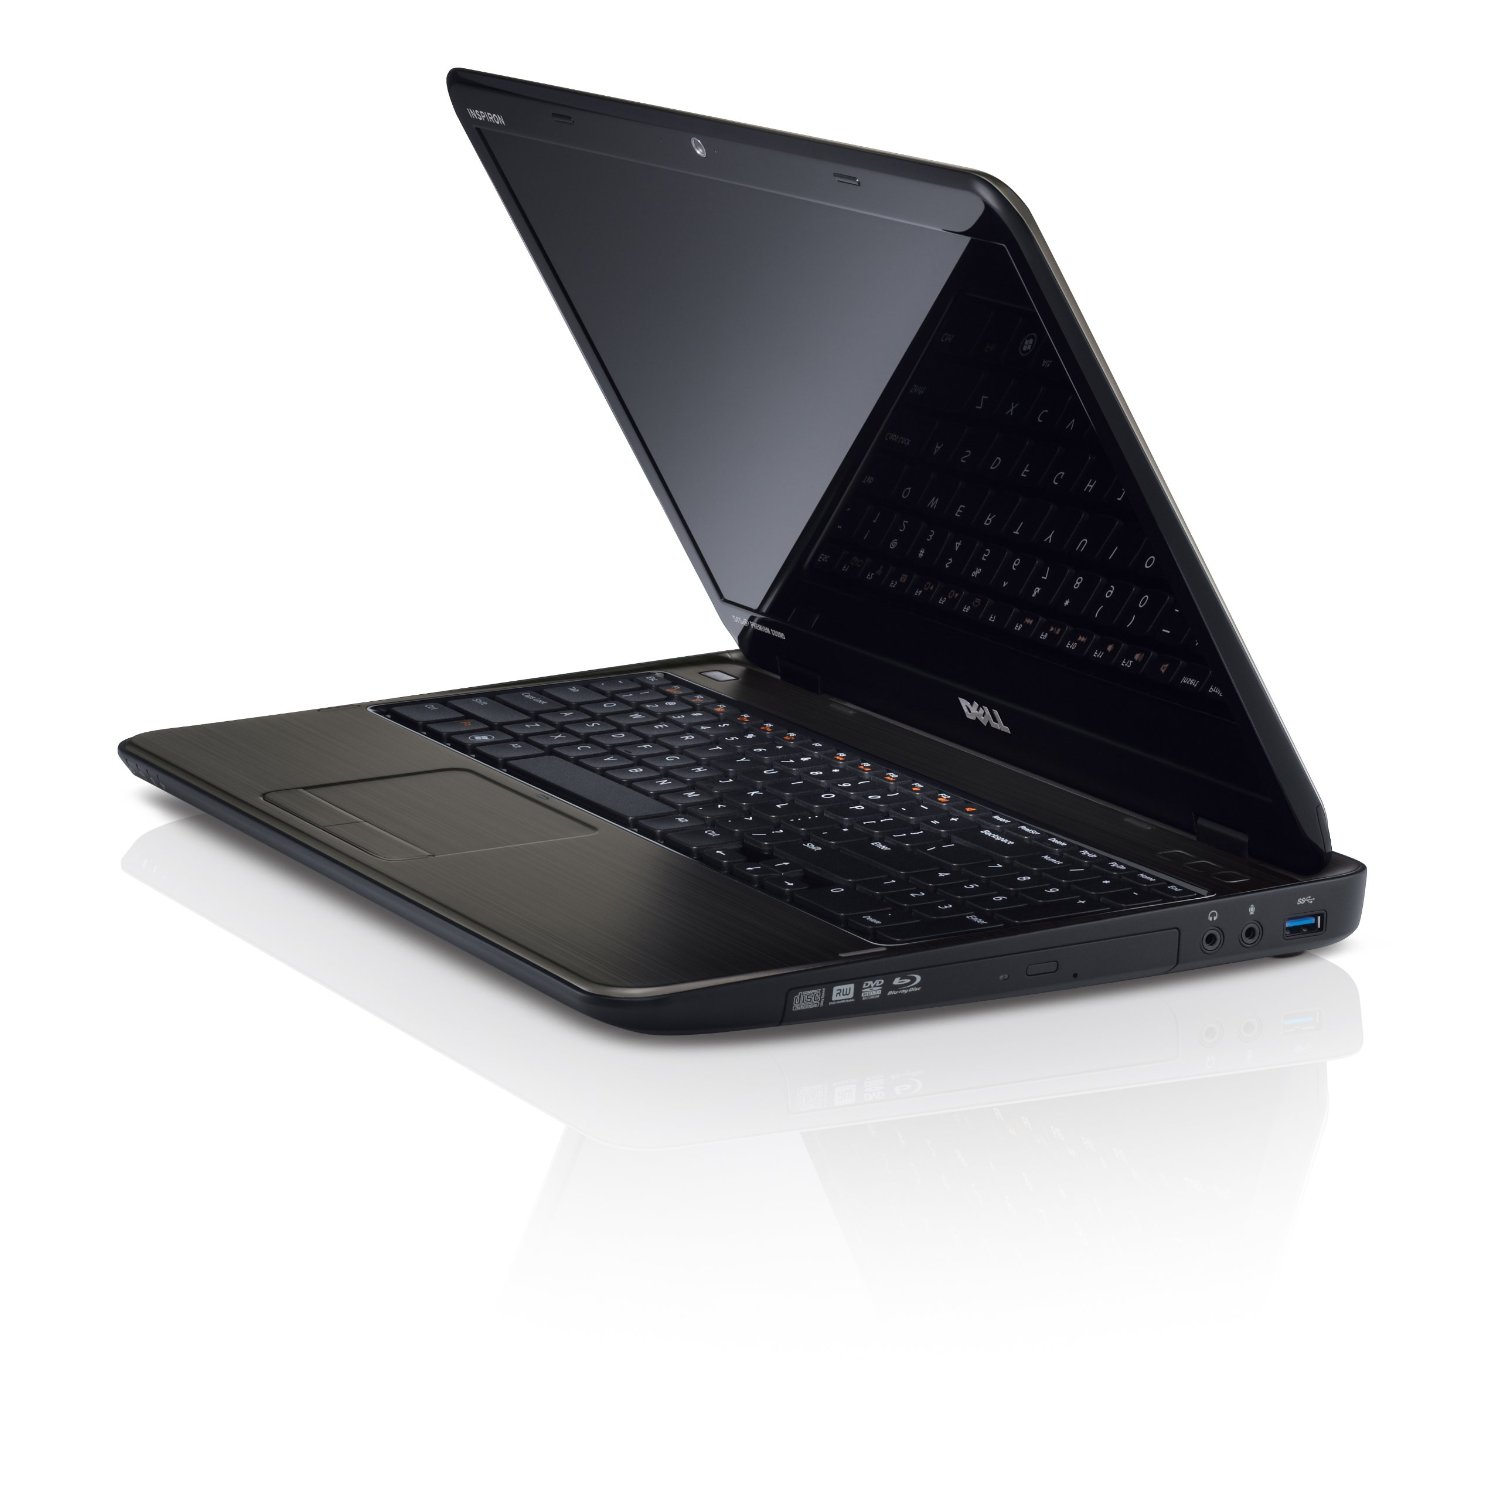 http://thetechjournal.com/wp-content/uploads/images/1111/1321531751-dell-inspiron-15rn-i15rn7059dbk-156inch-laptop-8.jpg